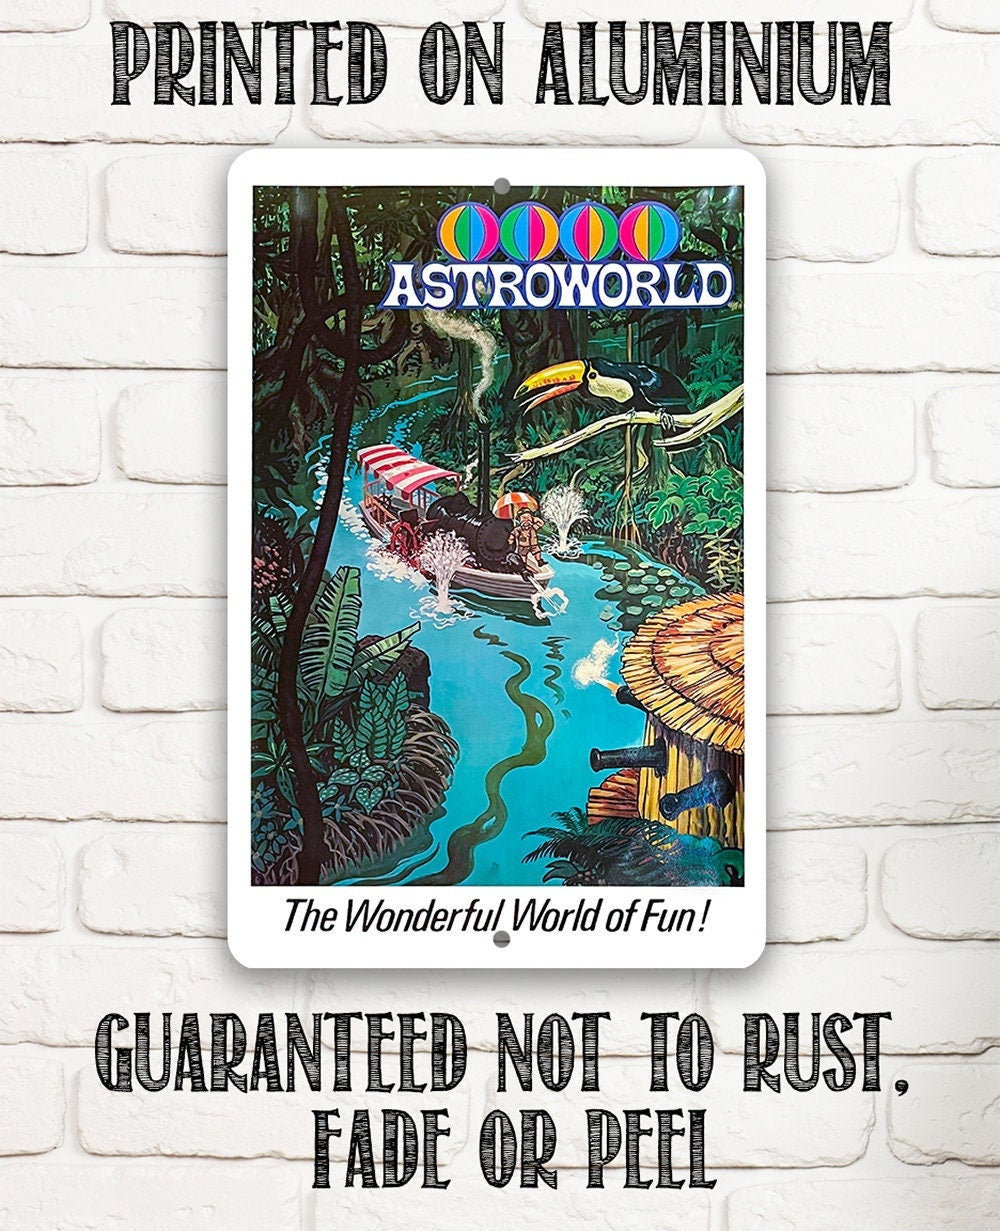 AstroWorld Park River of No Return - 8" x 12" or 12" x 18" Aluminum Tin Awesome Metal Poster Lone Star Art 